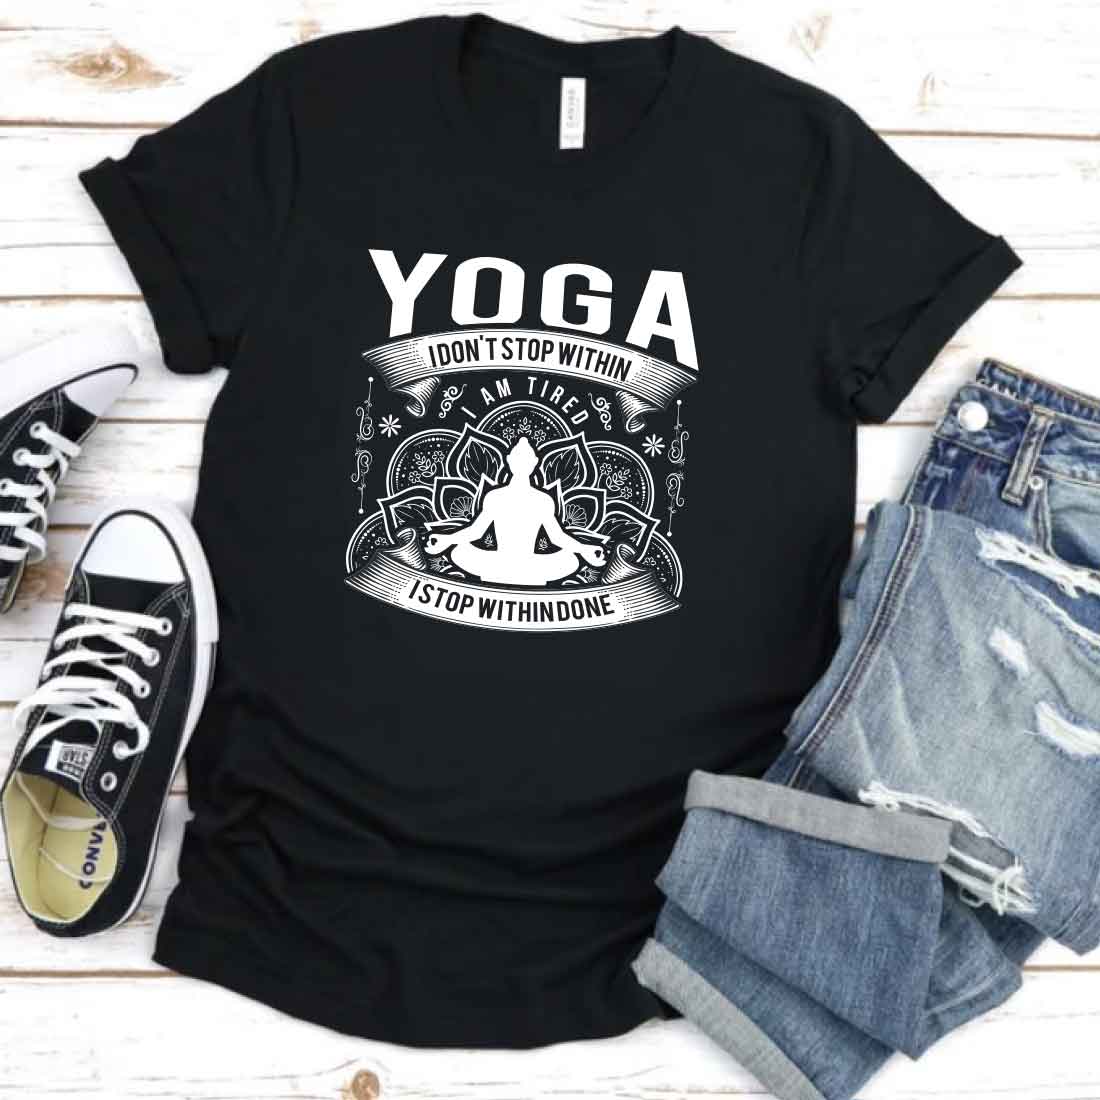 yoga i dont stop within i am tired I stop within done preview image.